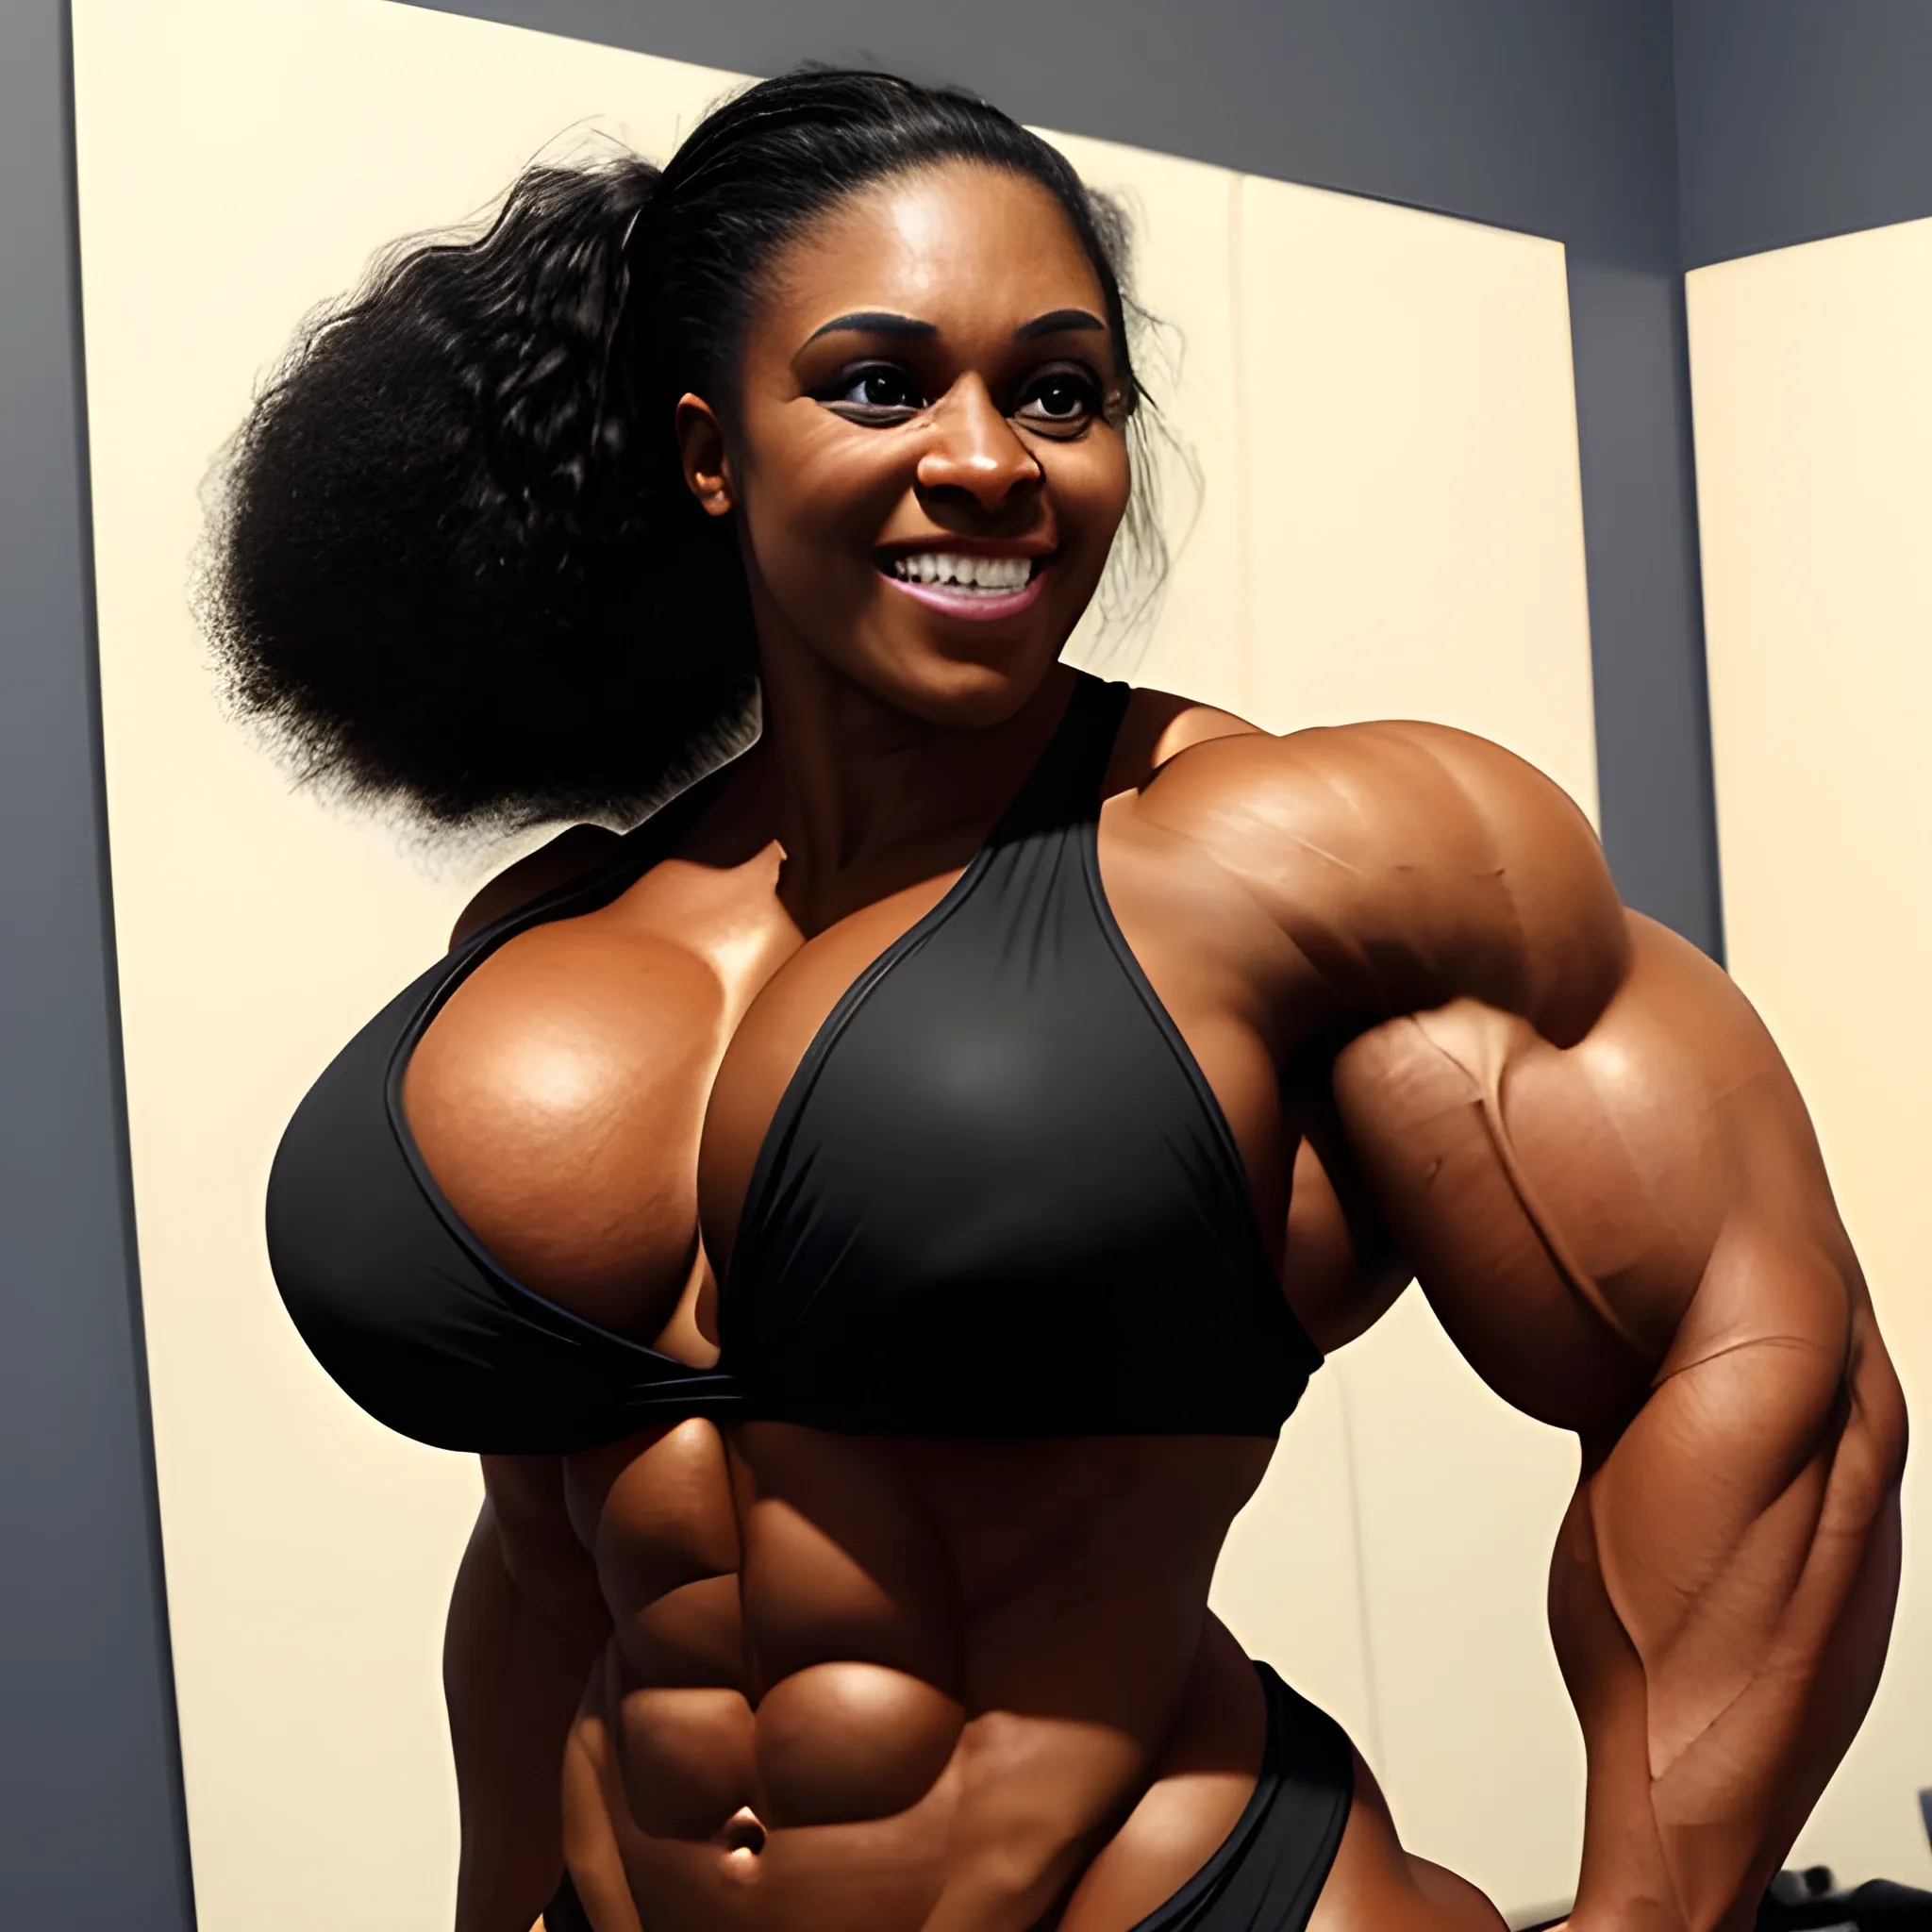 a full-body image of a triumphant heavyweight beautiful black black female bodybuilder with wide-set eyes with very narrow hips and waist, extremely muscular, hulkish, extremely wide shoulder-to-shoulder distance over 240 cm, extremely wide chest, smiling, expressive eyes, ten-pack abs, perfect in every way, chesty musculature with big shoulders and big biceps.

